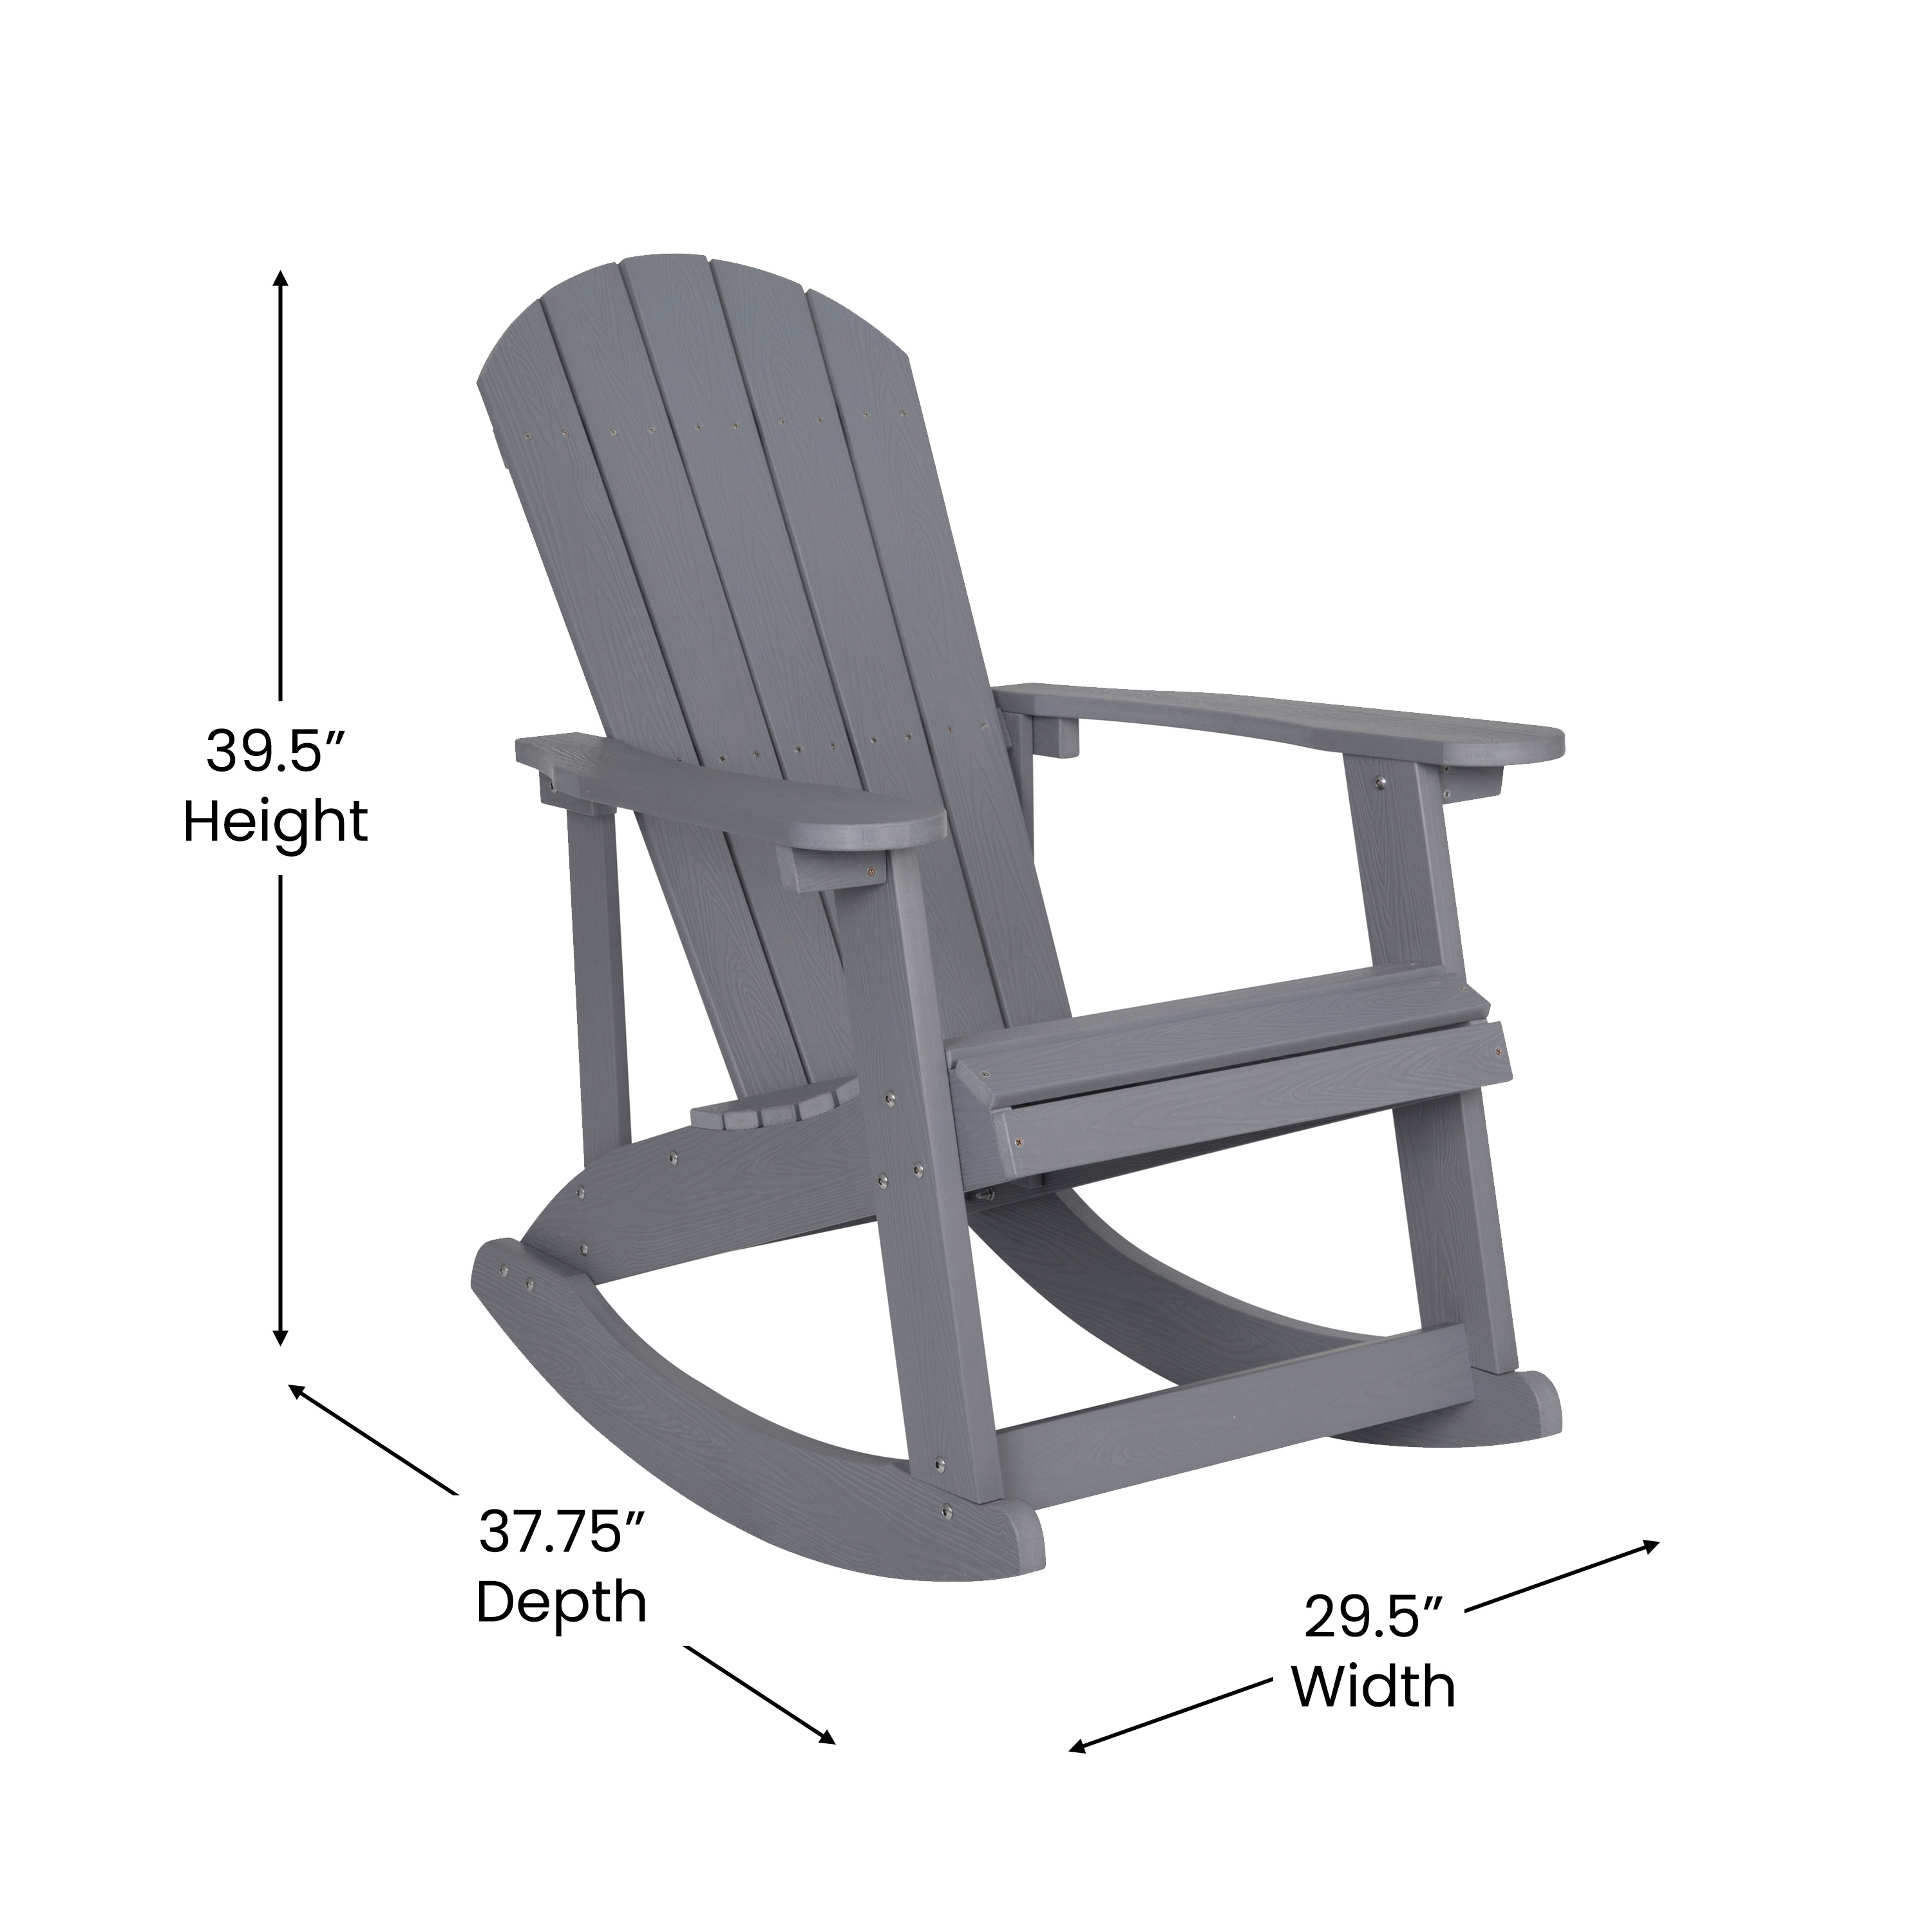 BizChair Commercial Grade All-Weather Poly Resin Wood Adirondack Rocking Chair with Rust Resistant Stainless Steel Hardware in Gray - image 5 of 11